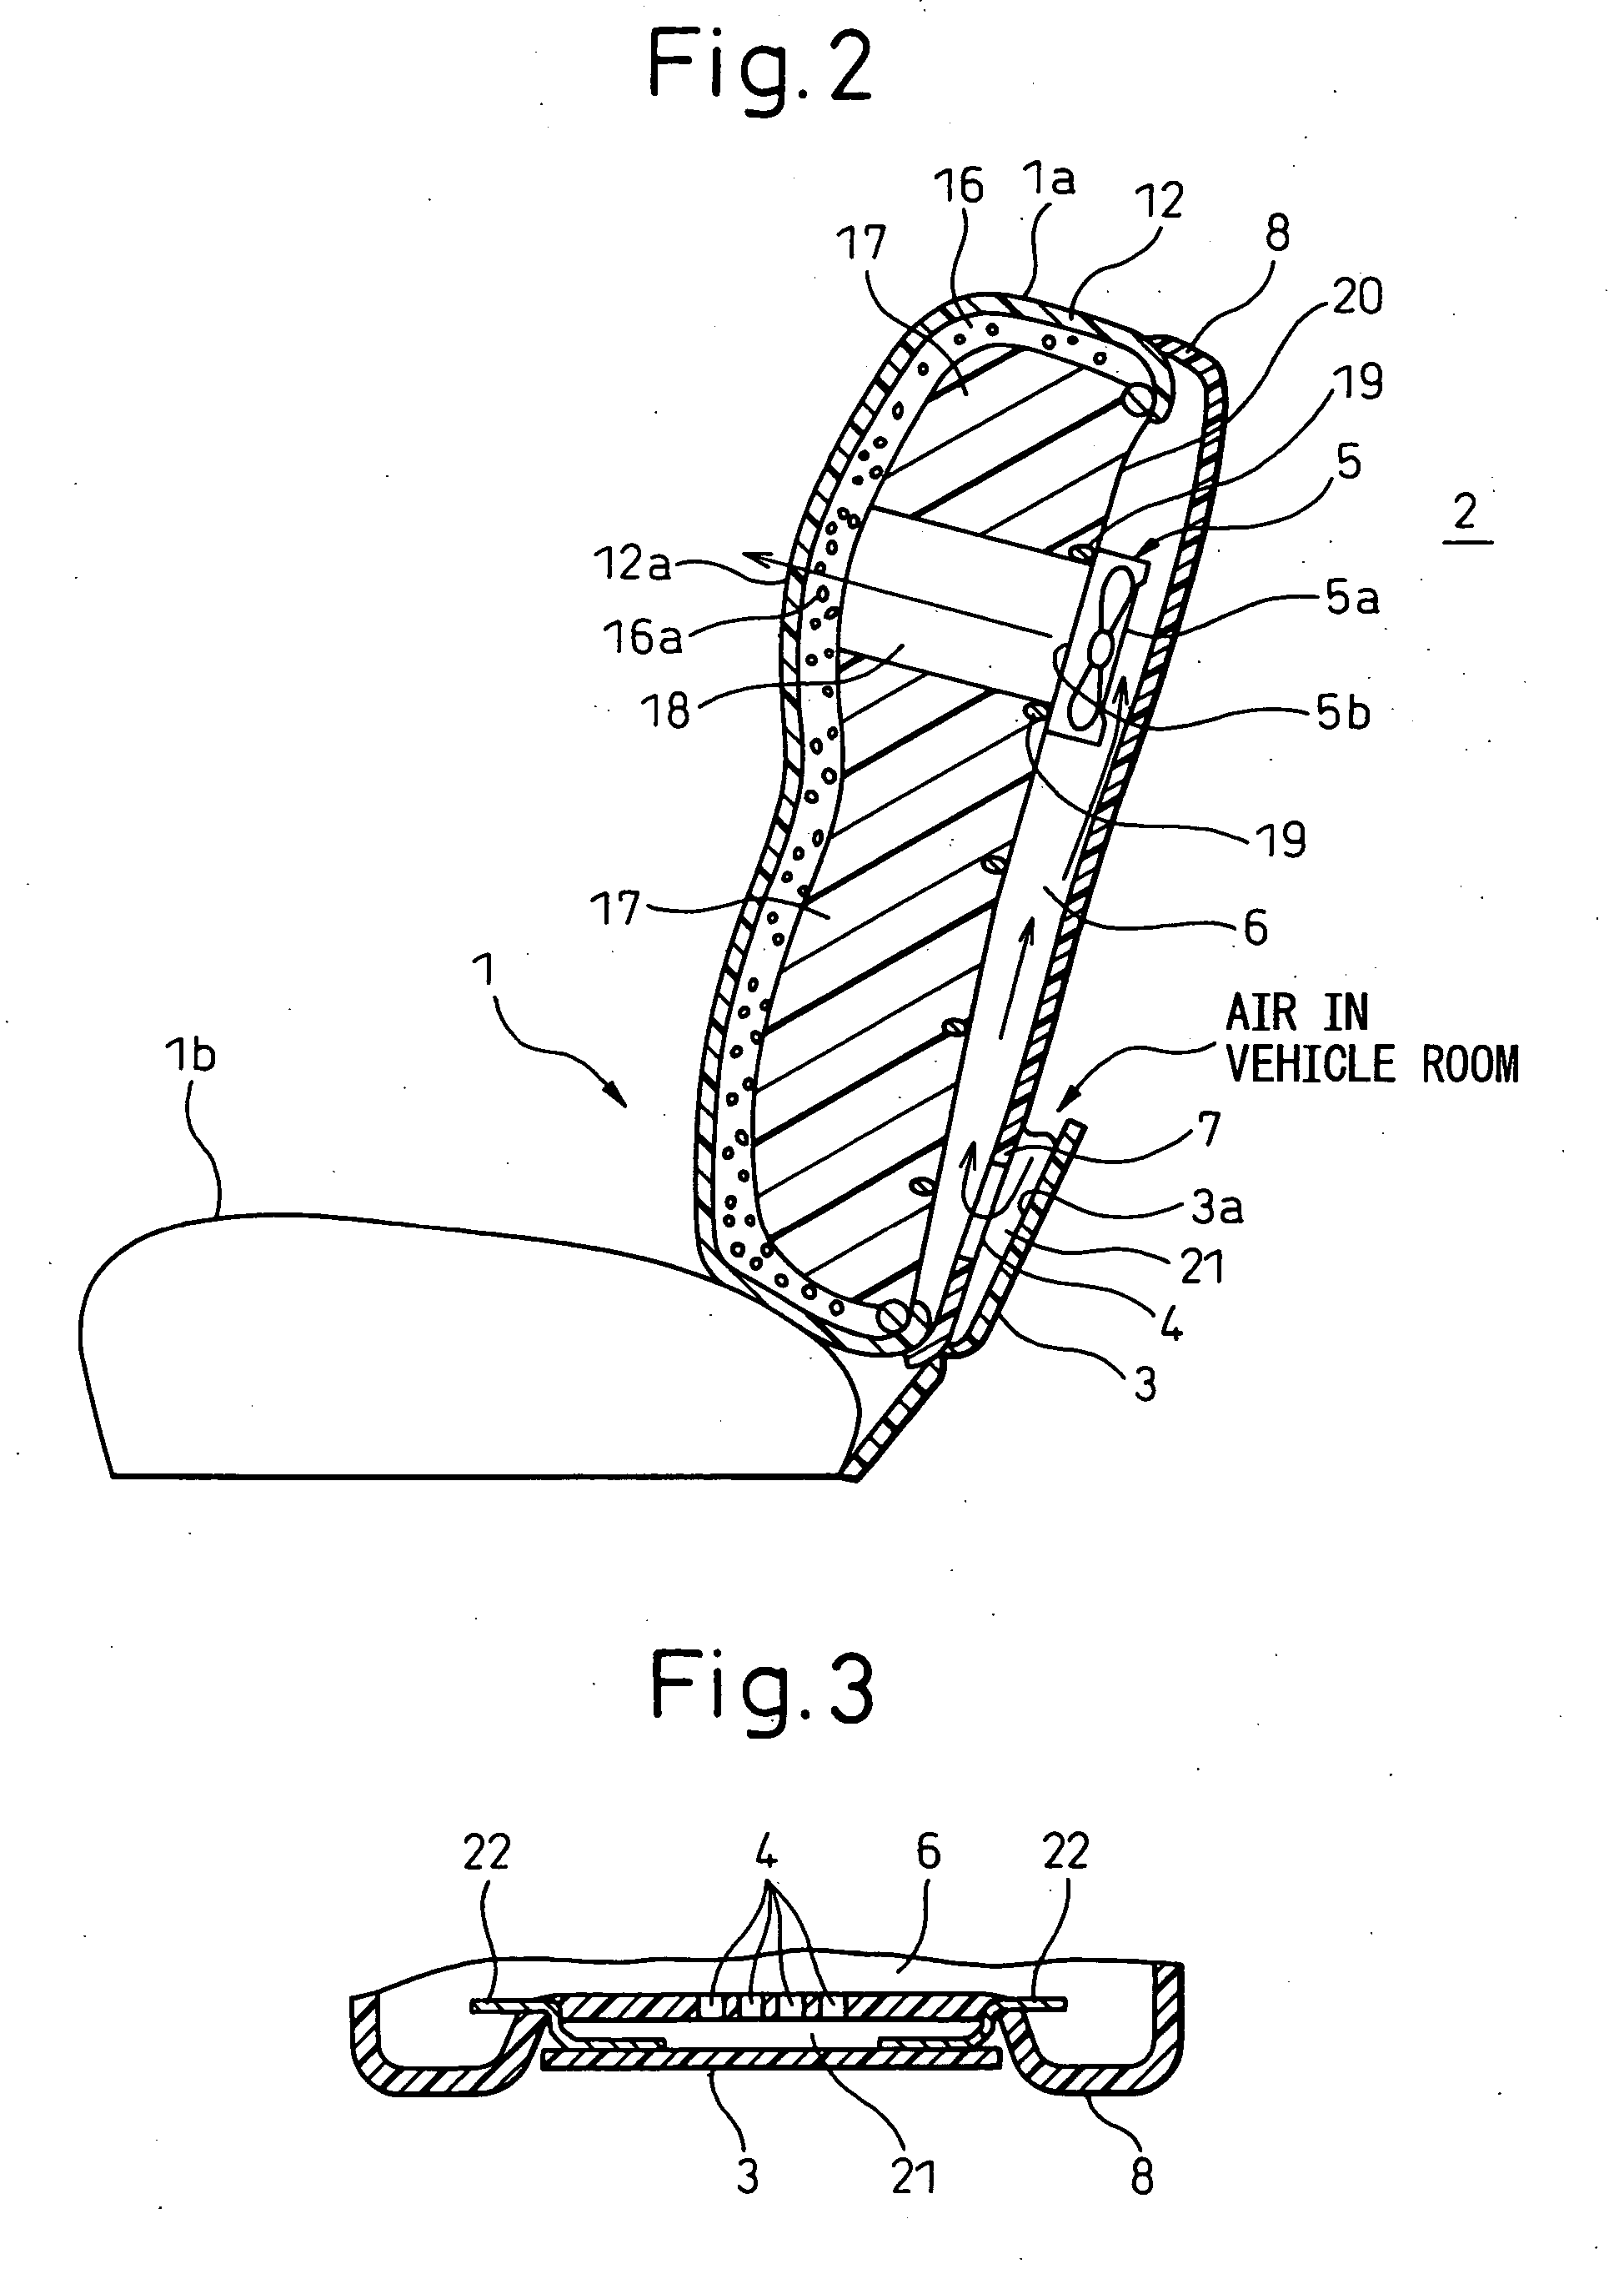 Air flow device incorporated into seat for a vehicle